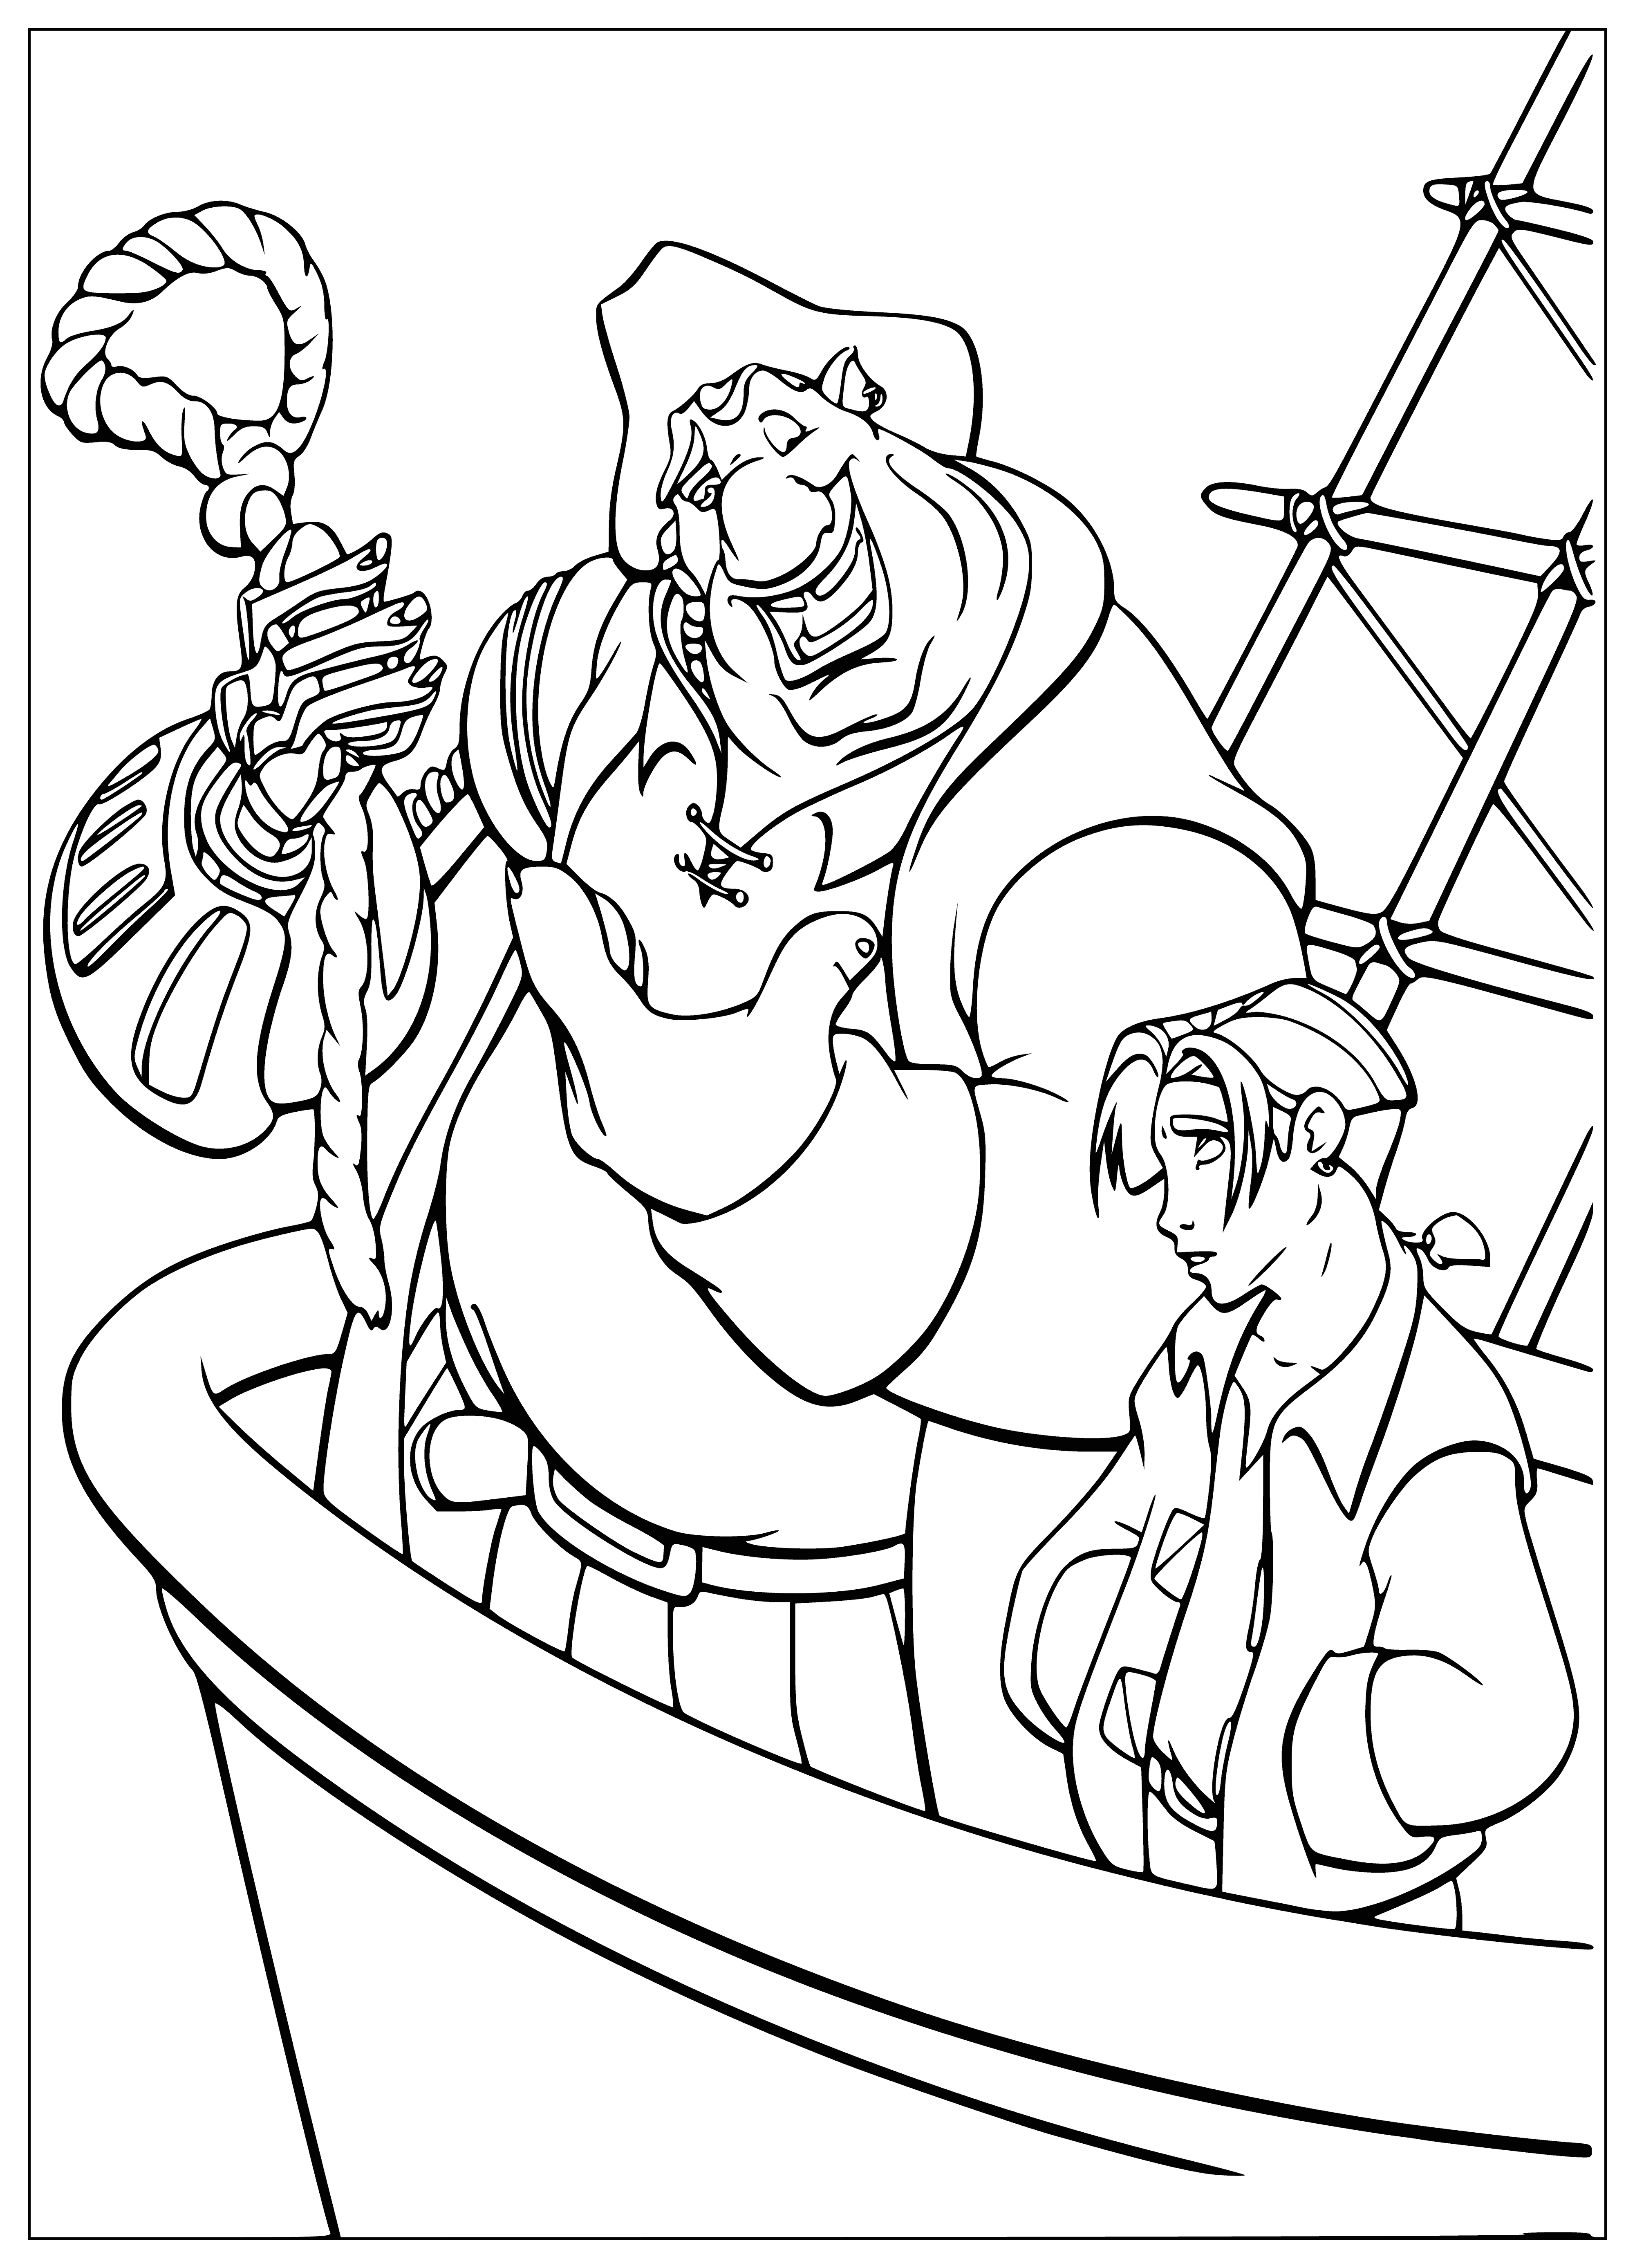 Silver teaches Jimma coloring page